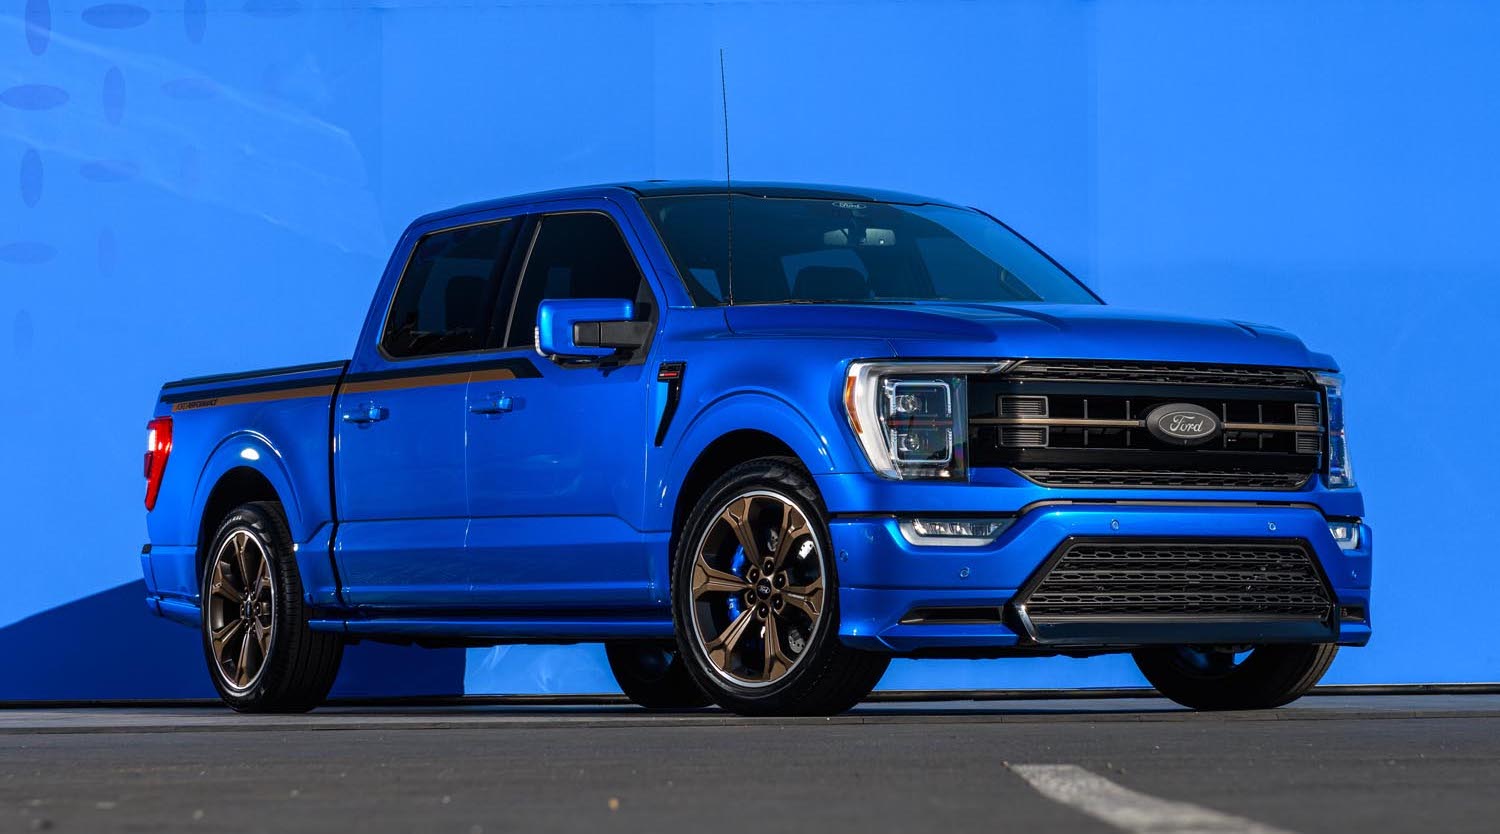 2022 Ford Street Performance F150 Supercharged V8 Debuts at SEMA 2021